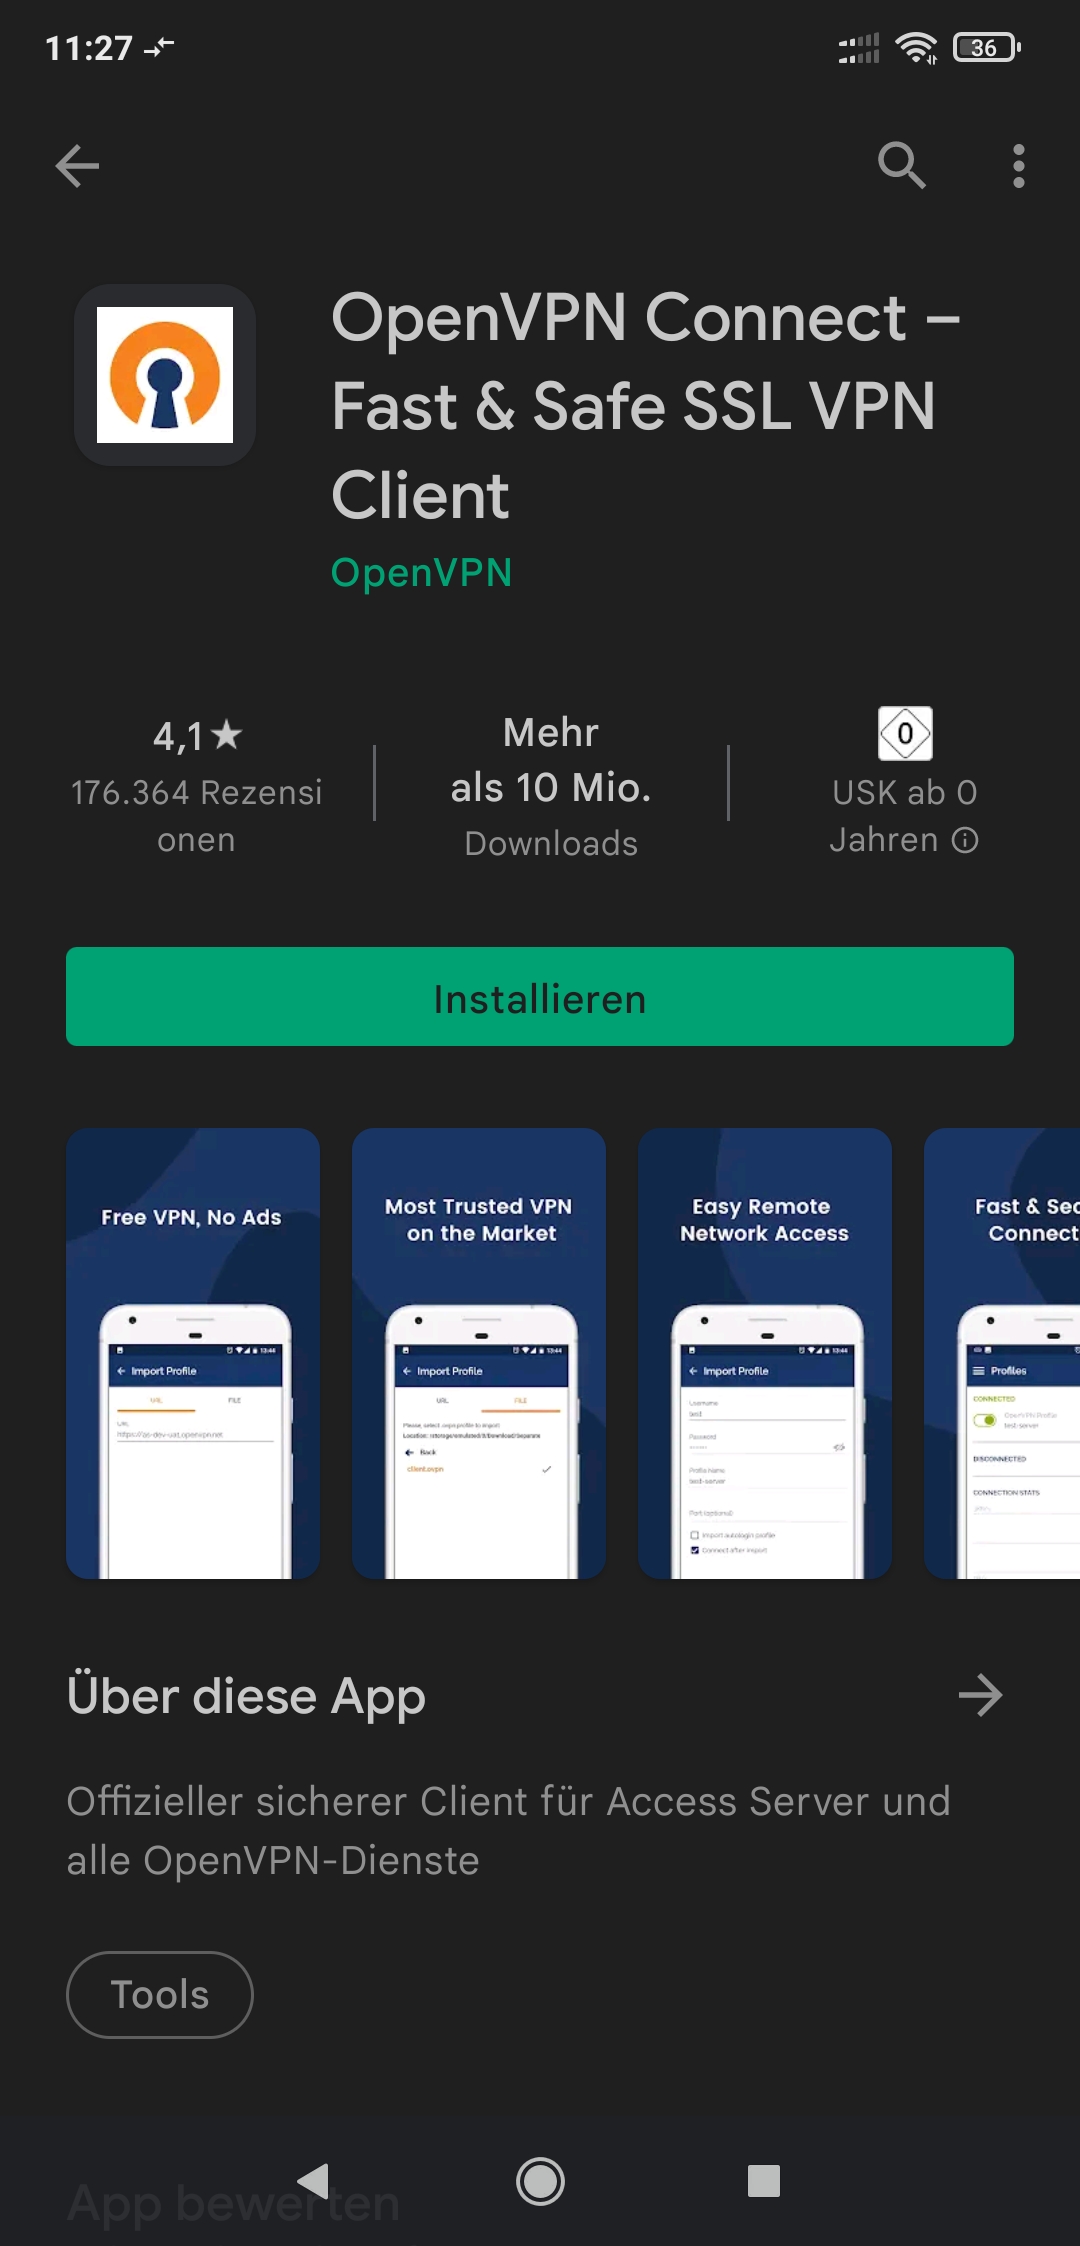 Download the OpenVPN Connect app